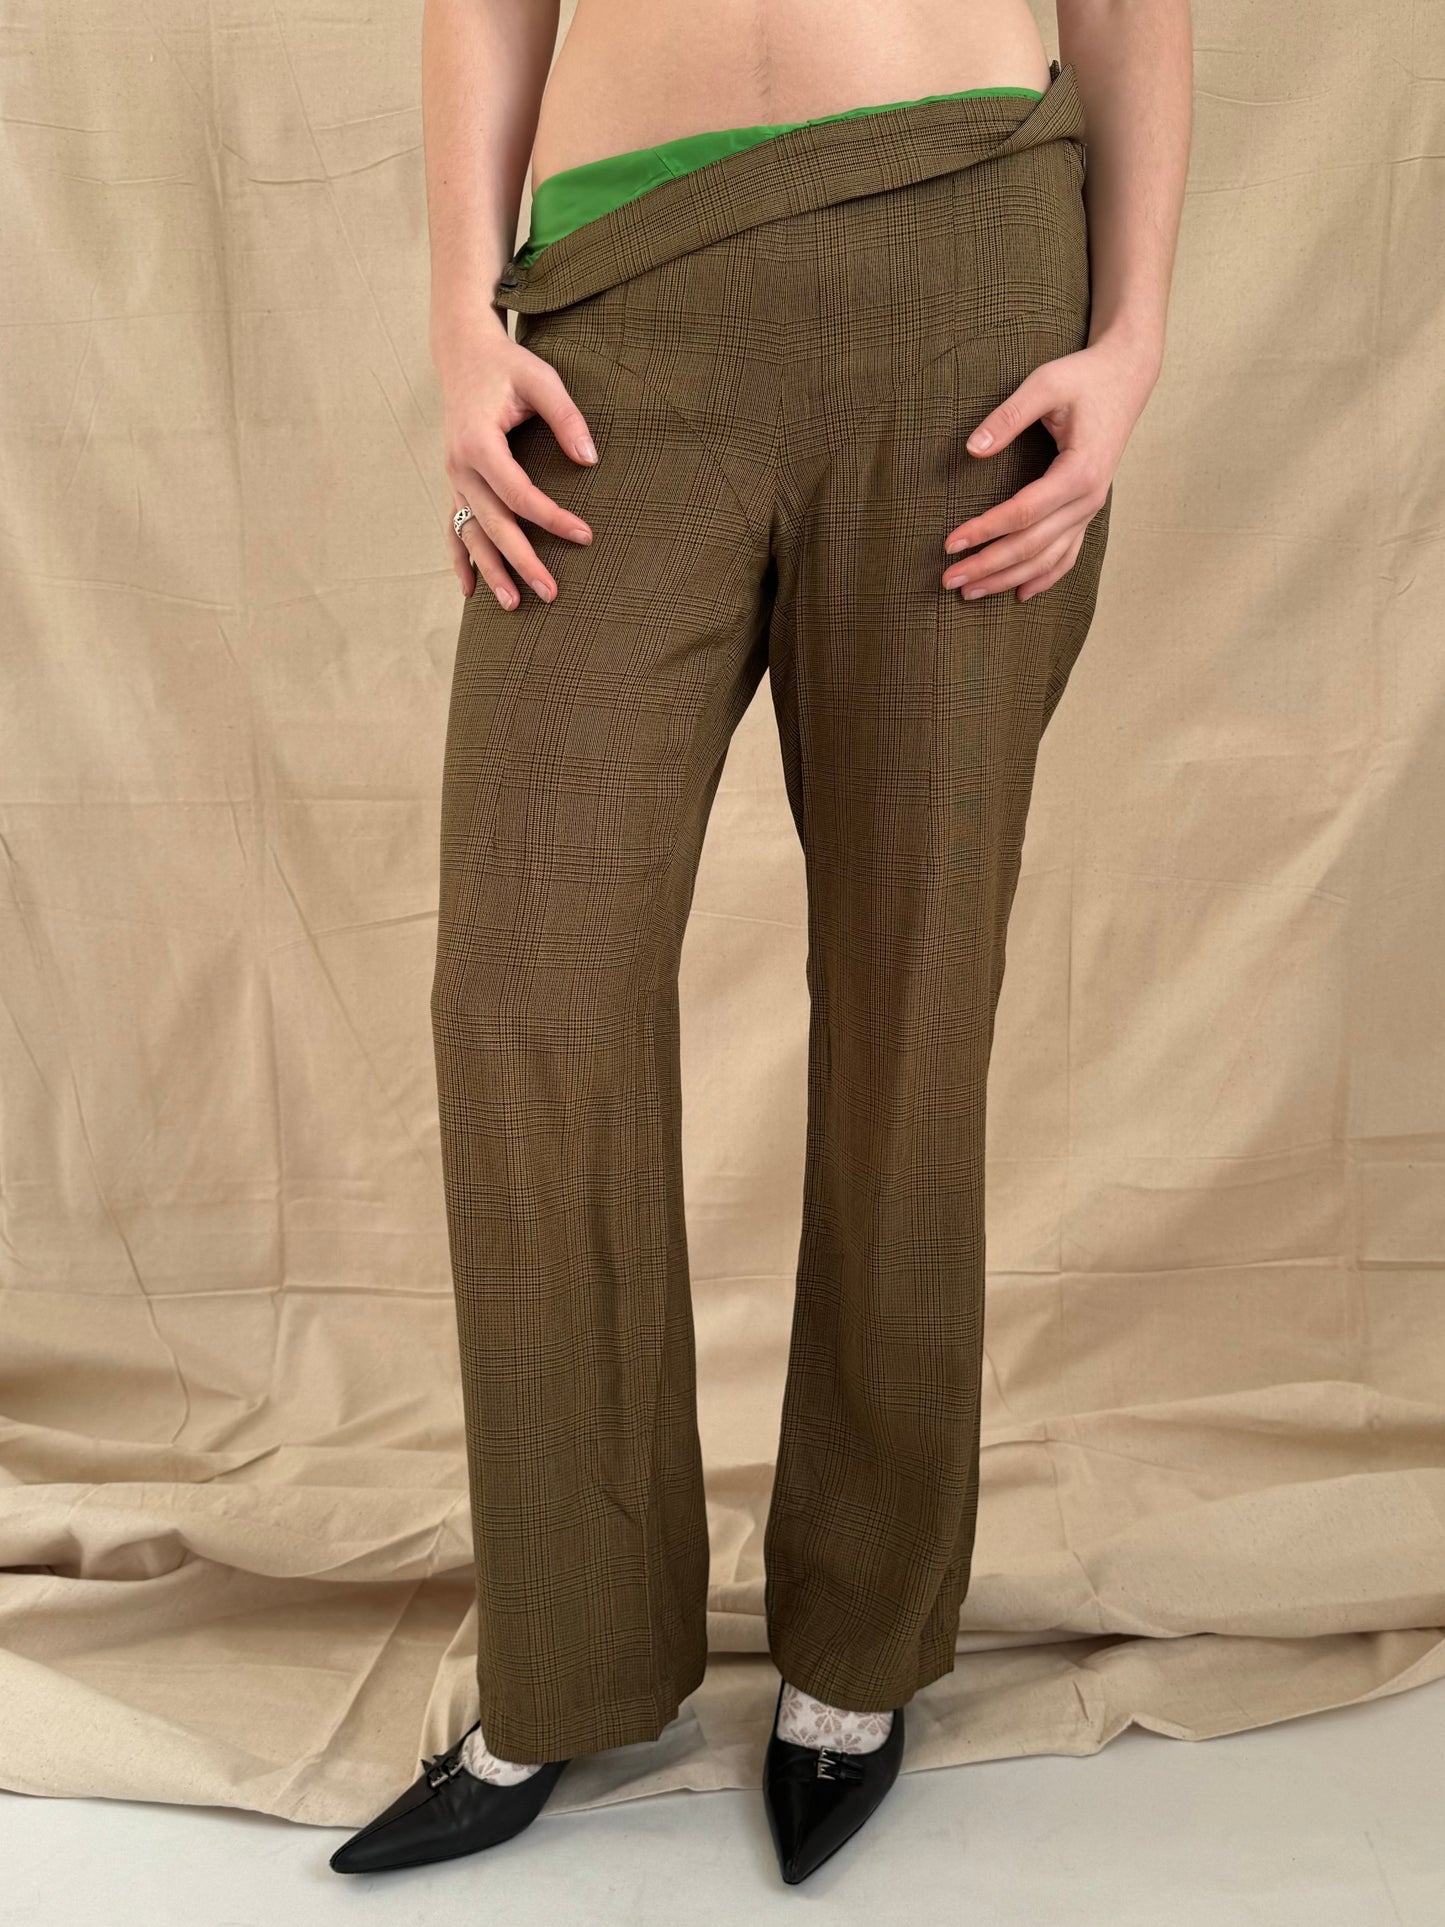 Junya Watanabe 1995 Comme des garcons trousers